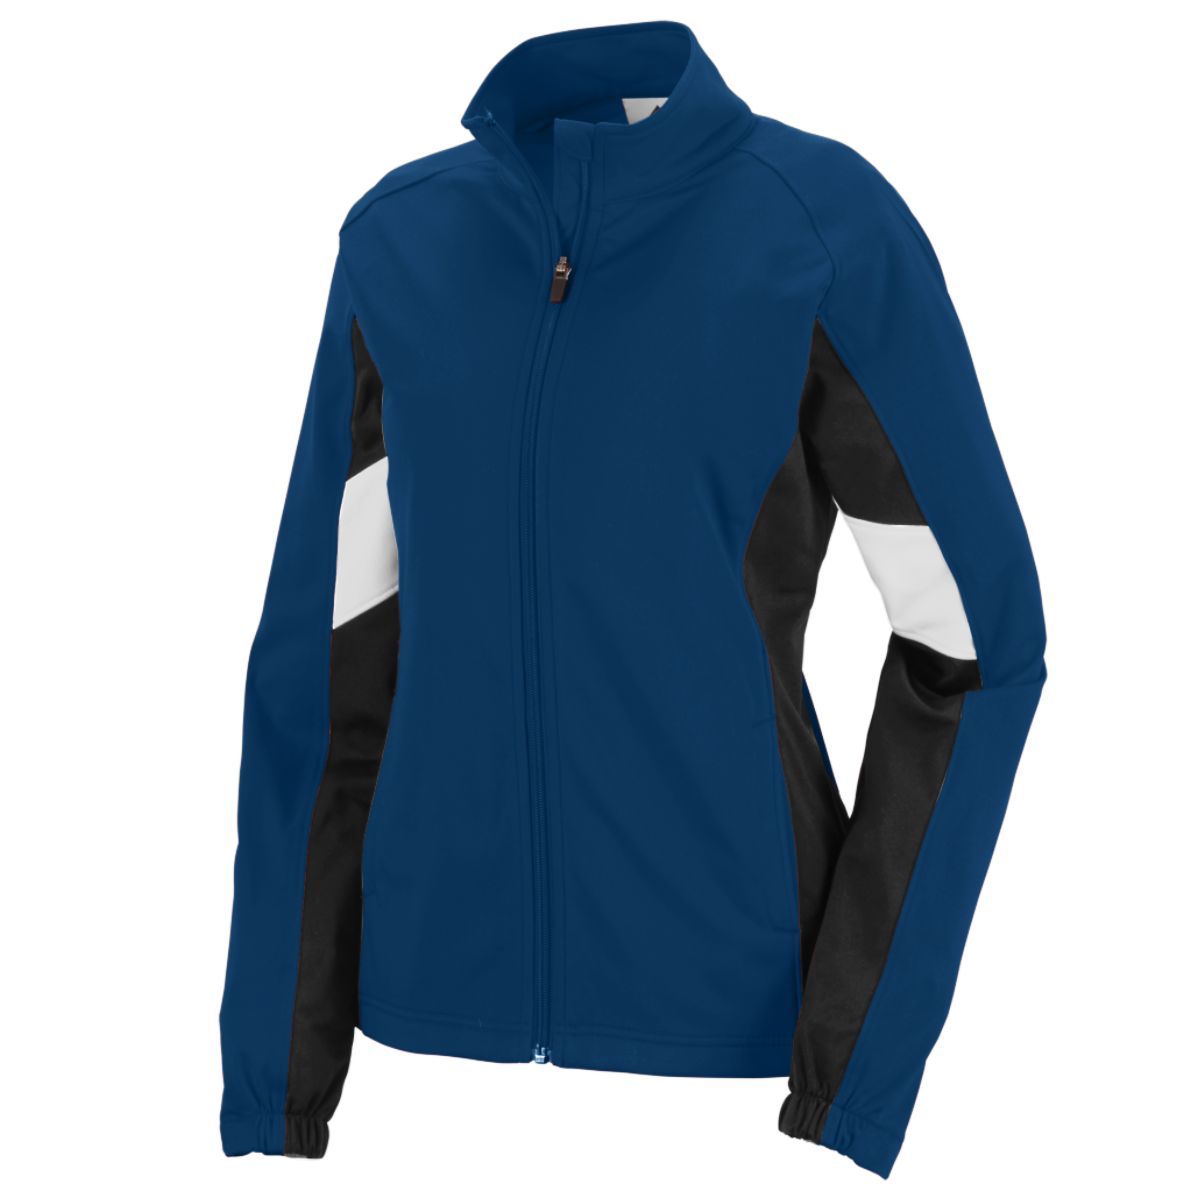 Augusta Sportswear Ladies Tour De Force Jacket in Navy/Black/White  -Part of the Ladies, Ladies-Jacket, Augusta-Products, Outerwear product lines at KanaleyCreations.com